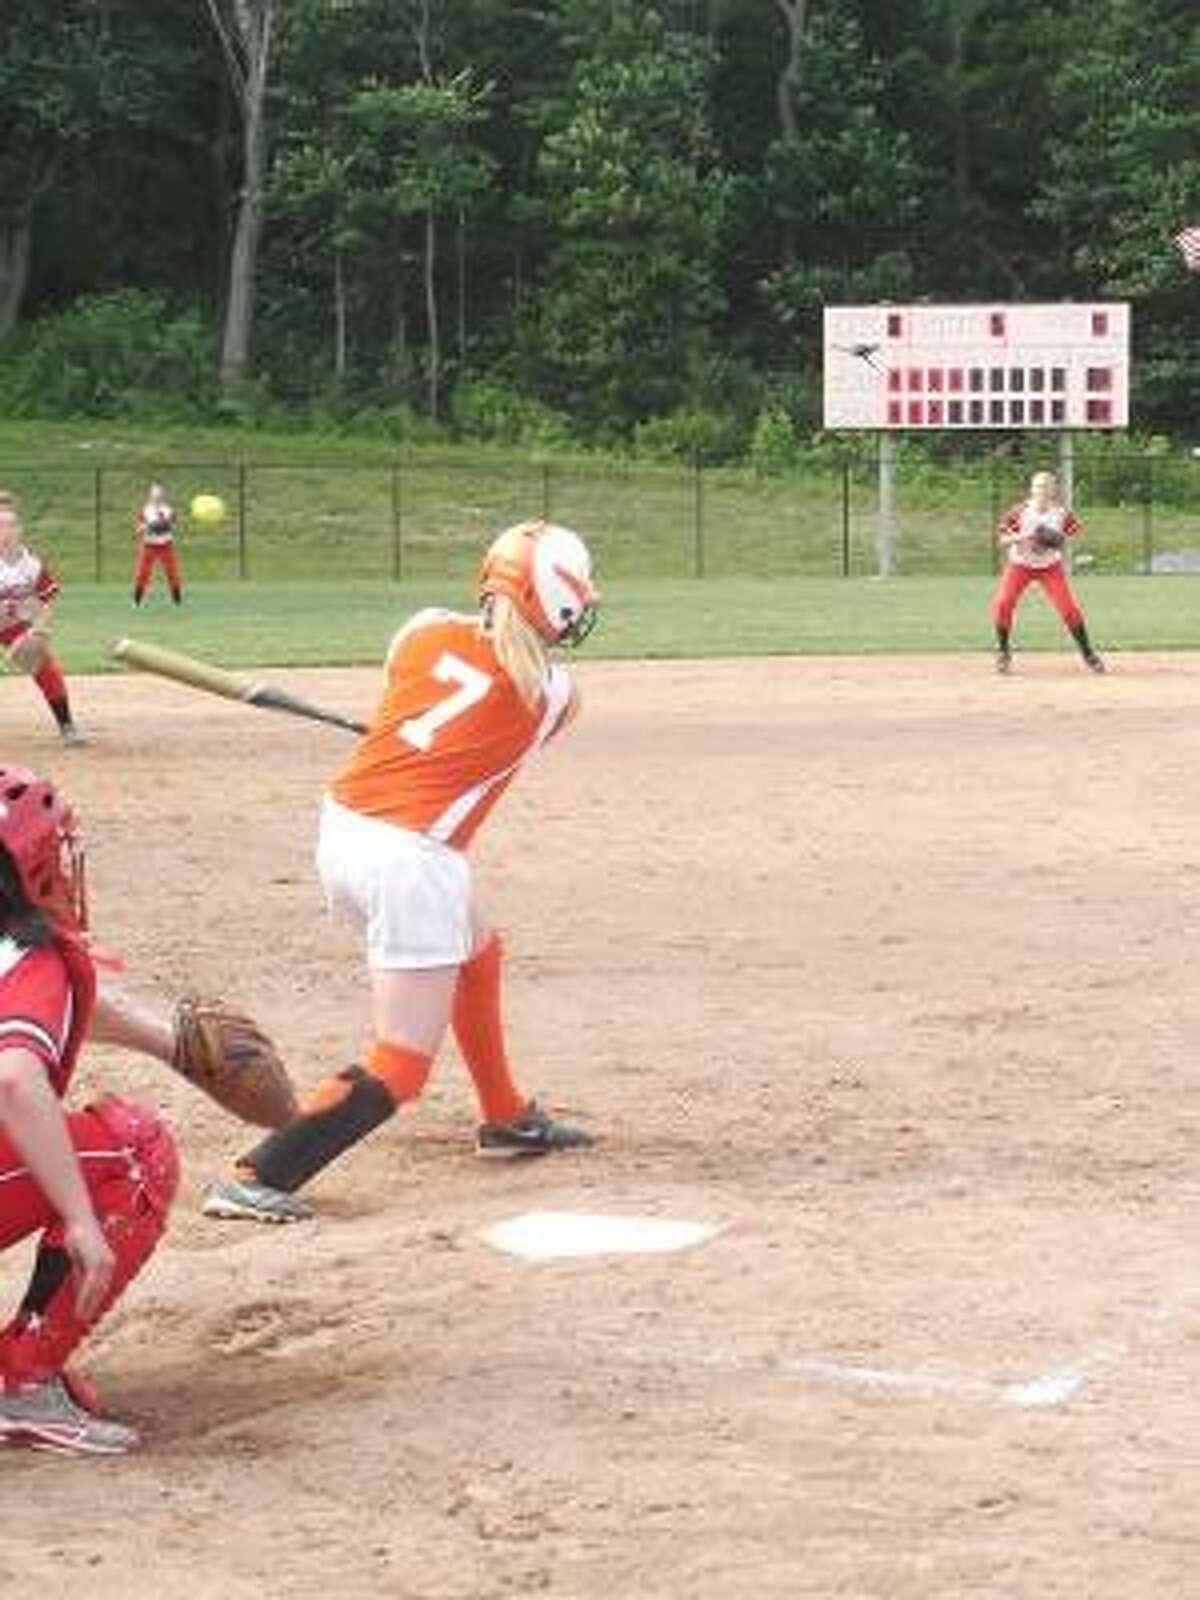 KEVIN D. ROBERTS/Register Citizen Terryville's Angel Katiewicz fouls off a pitch during Tuesday afternoon's Class S first round softball game against Wamogo at Terryville High School. The Kangaroos lost 1-0.